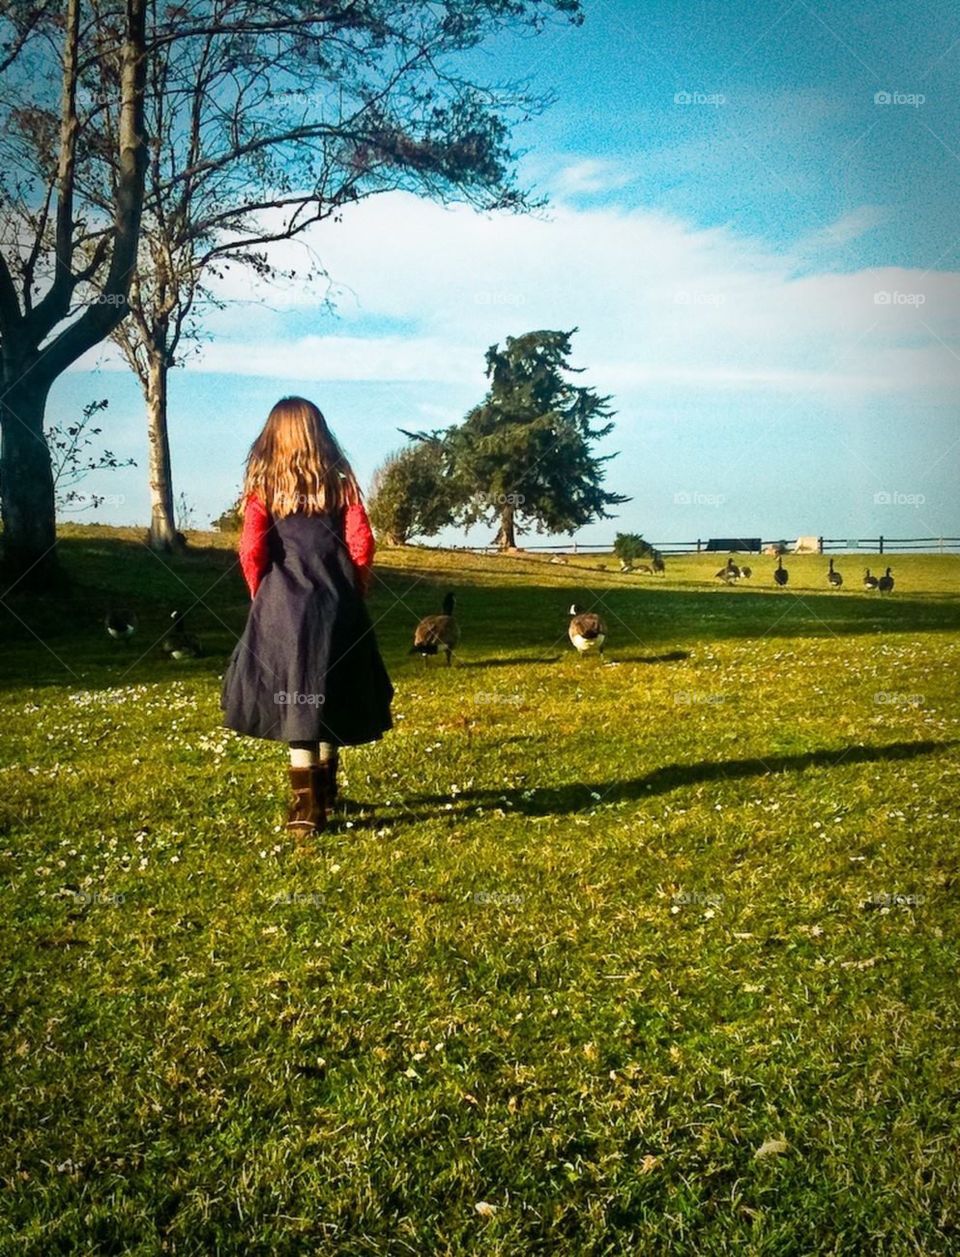 My daughter walking towards the geese, in Coyote Point, Burlingame, California 